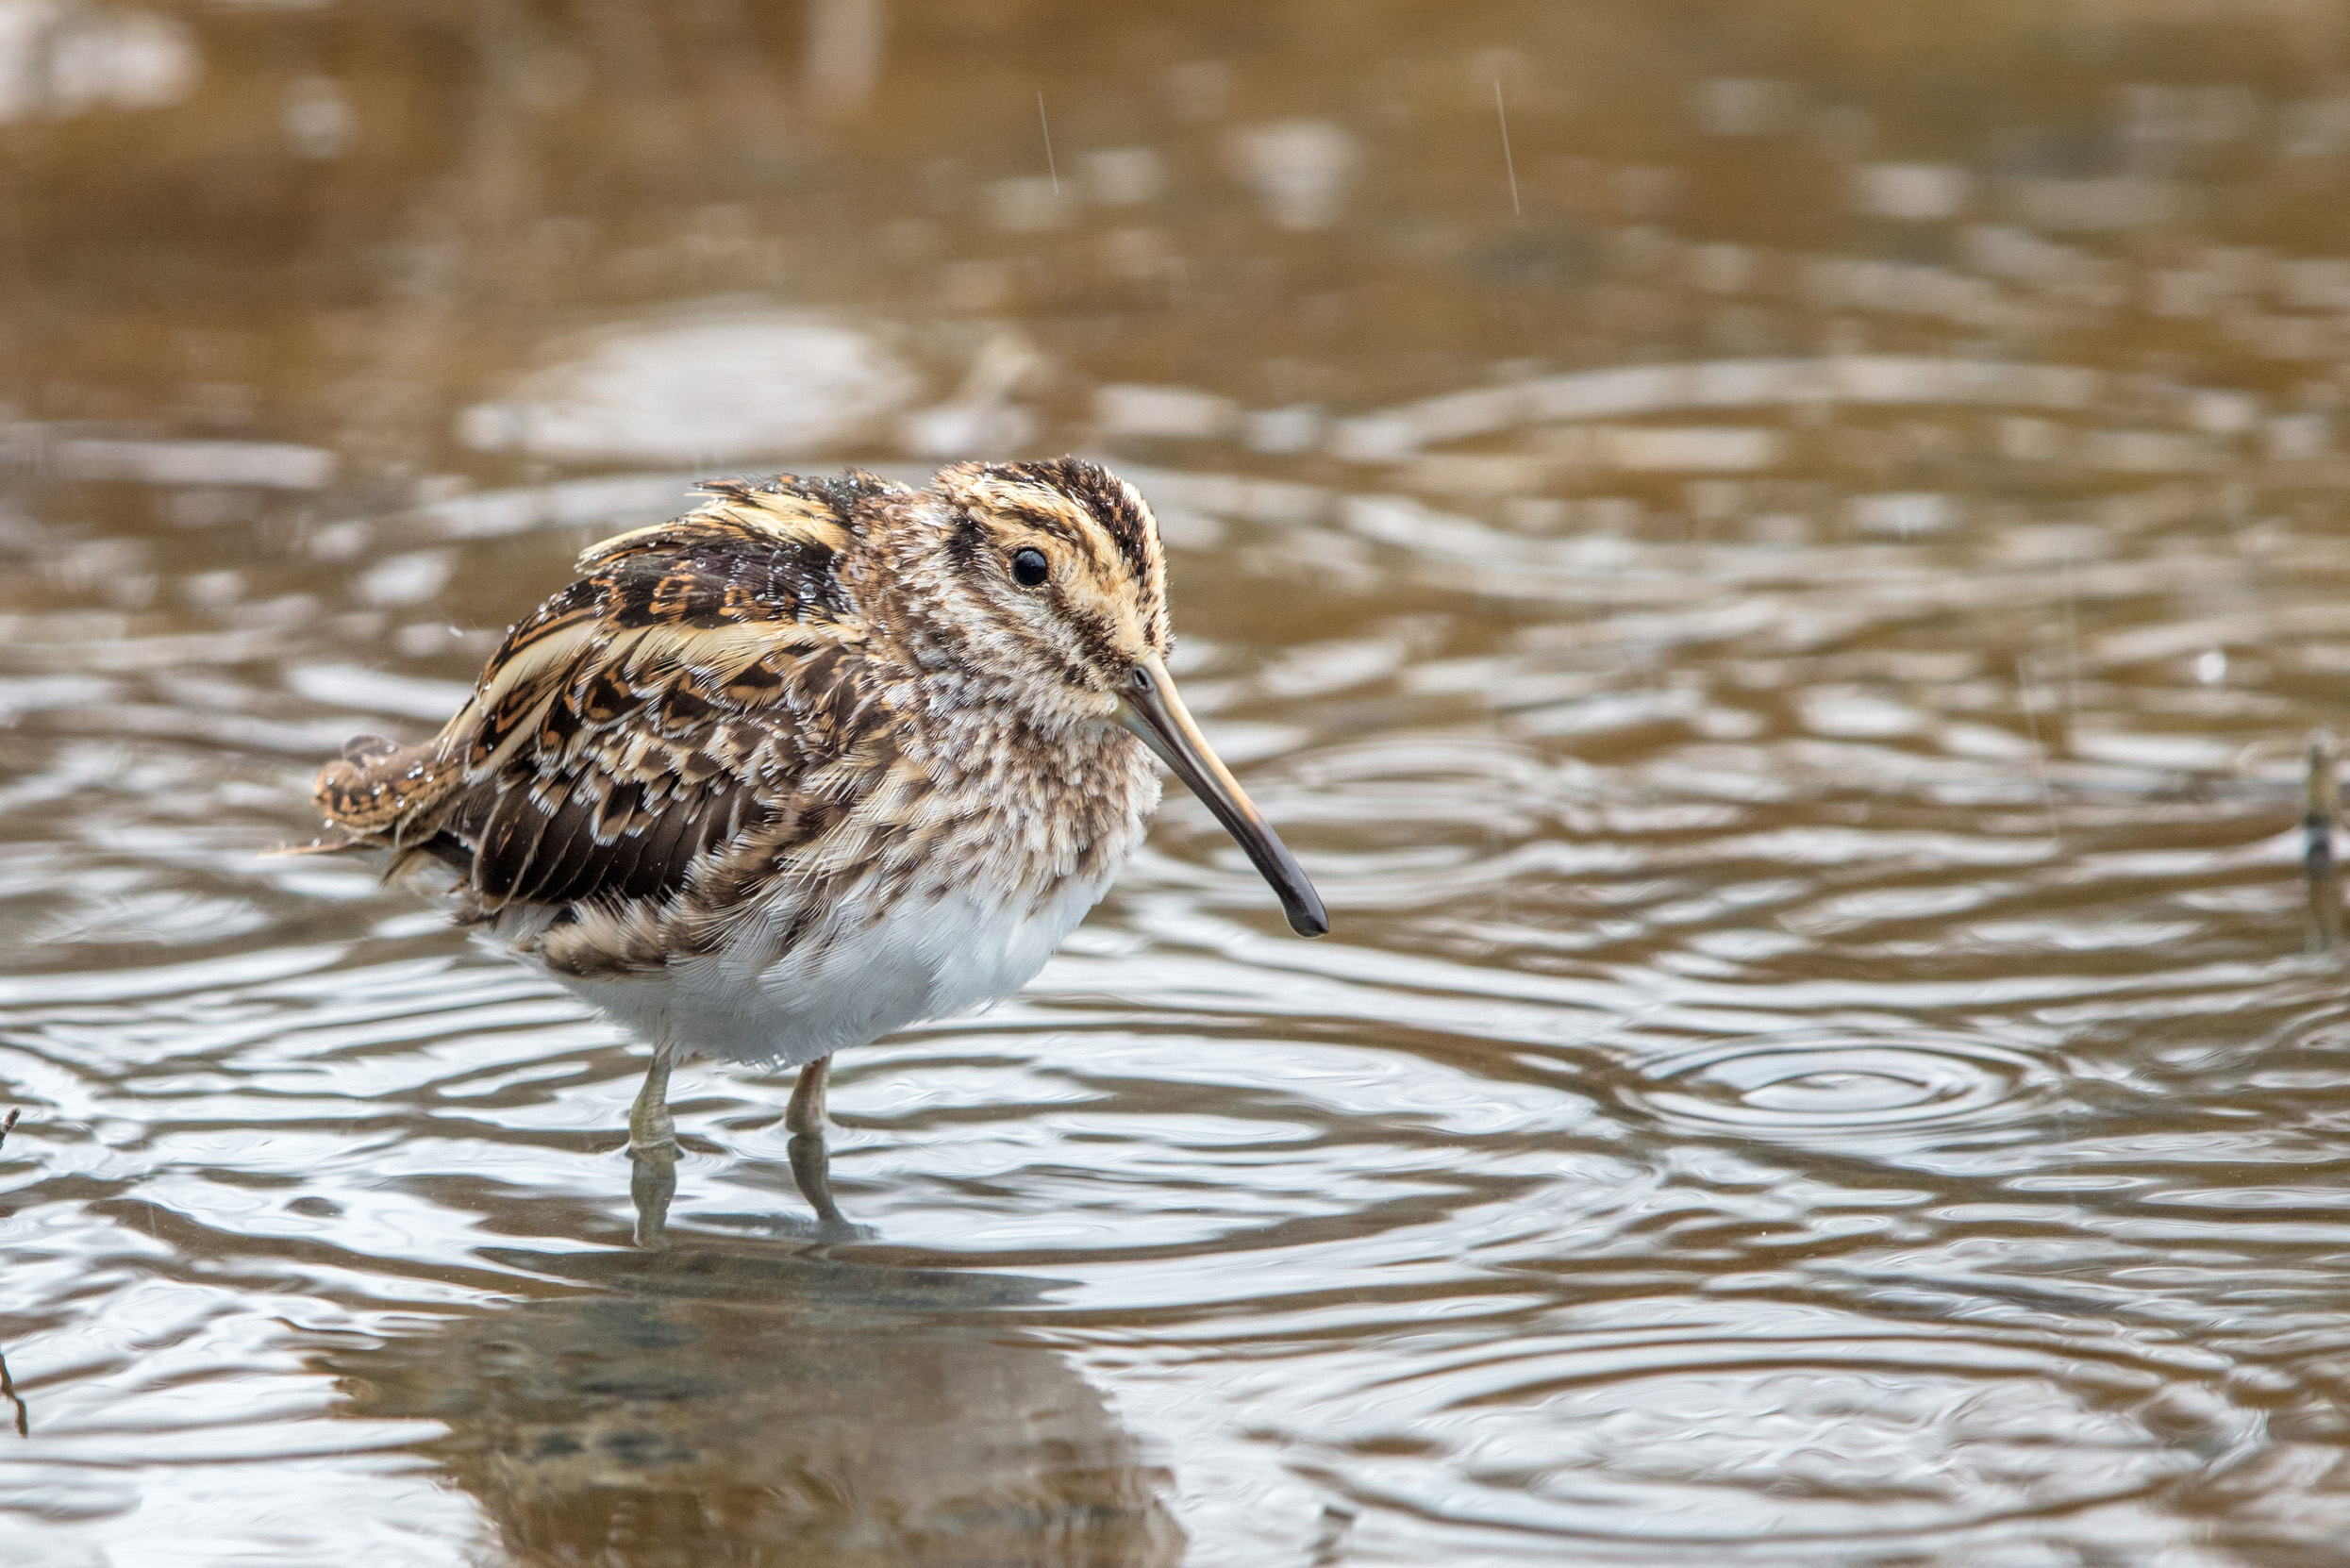 A Jack Snipe stood in shallow brown water.